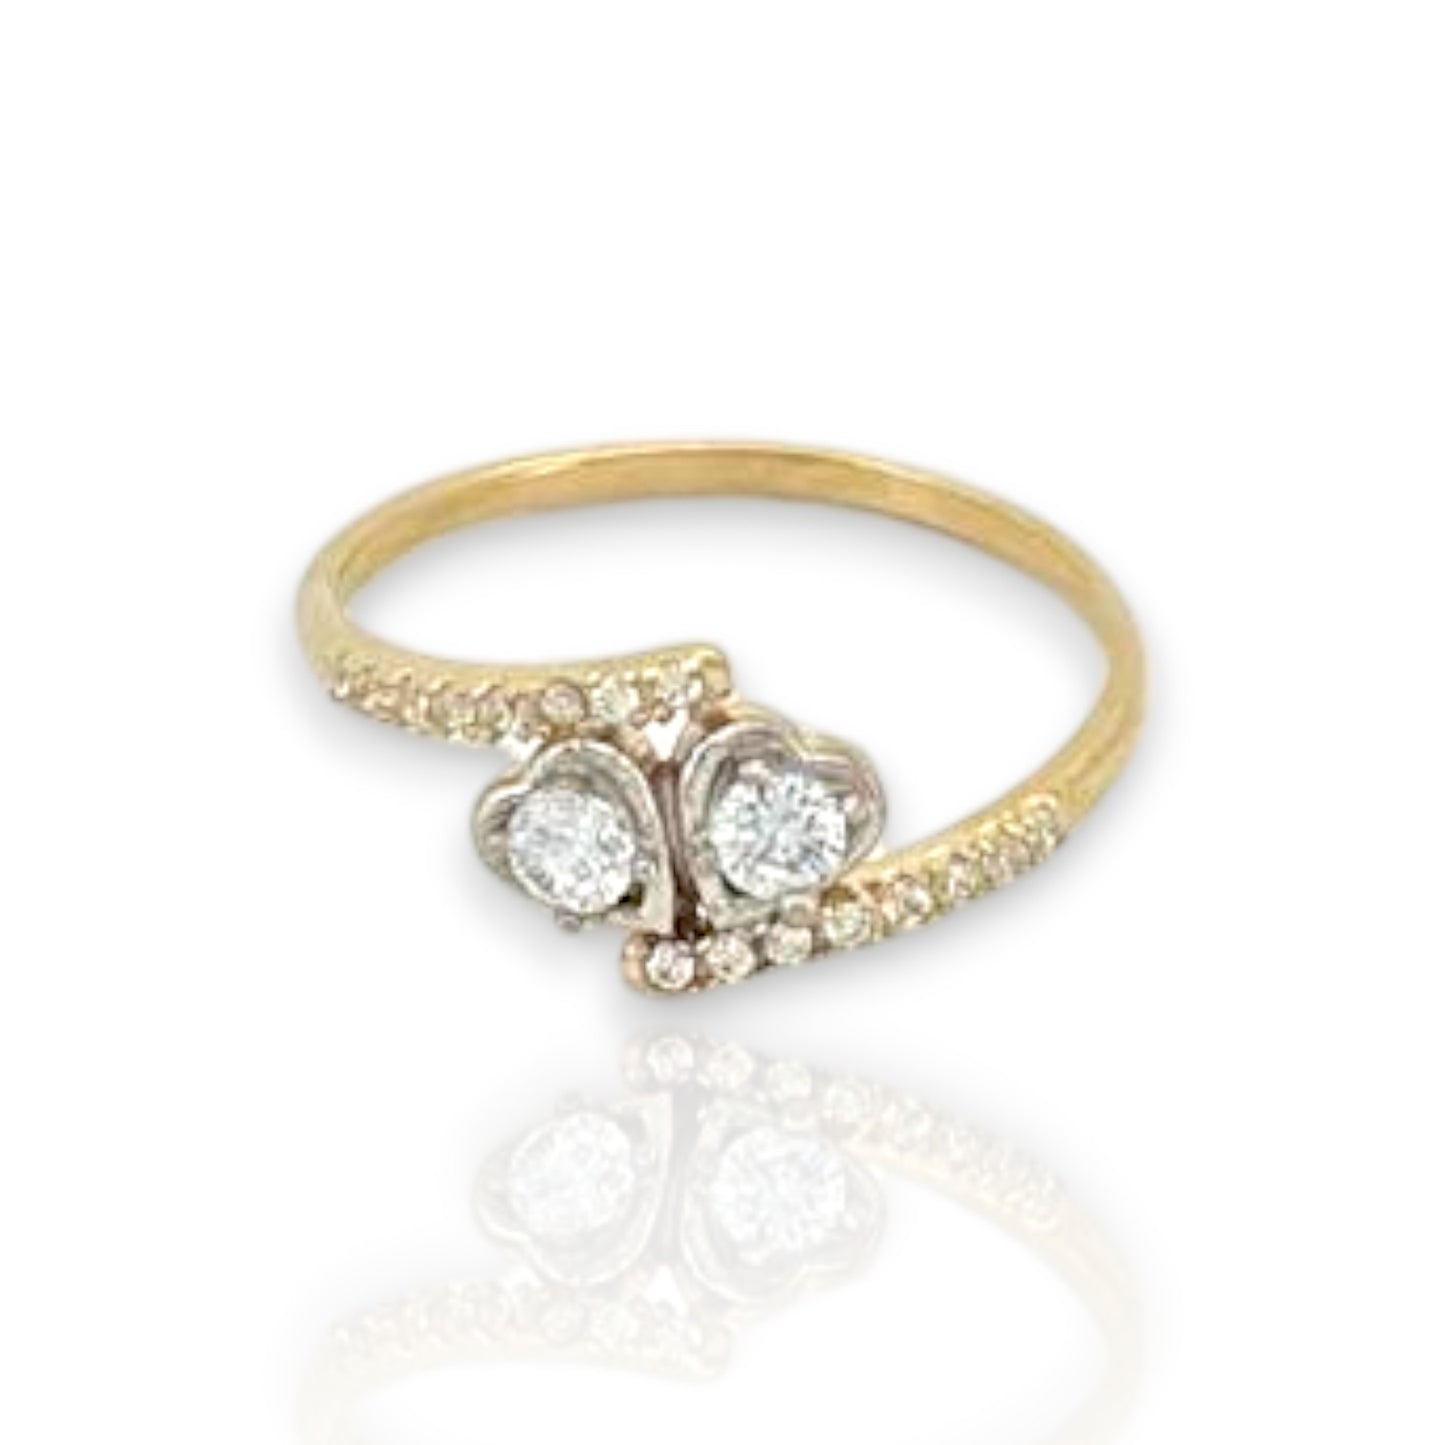 Double Heart CZ Ring - 10K Yellow Gold